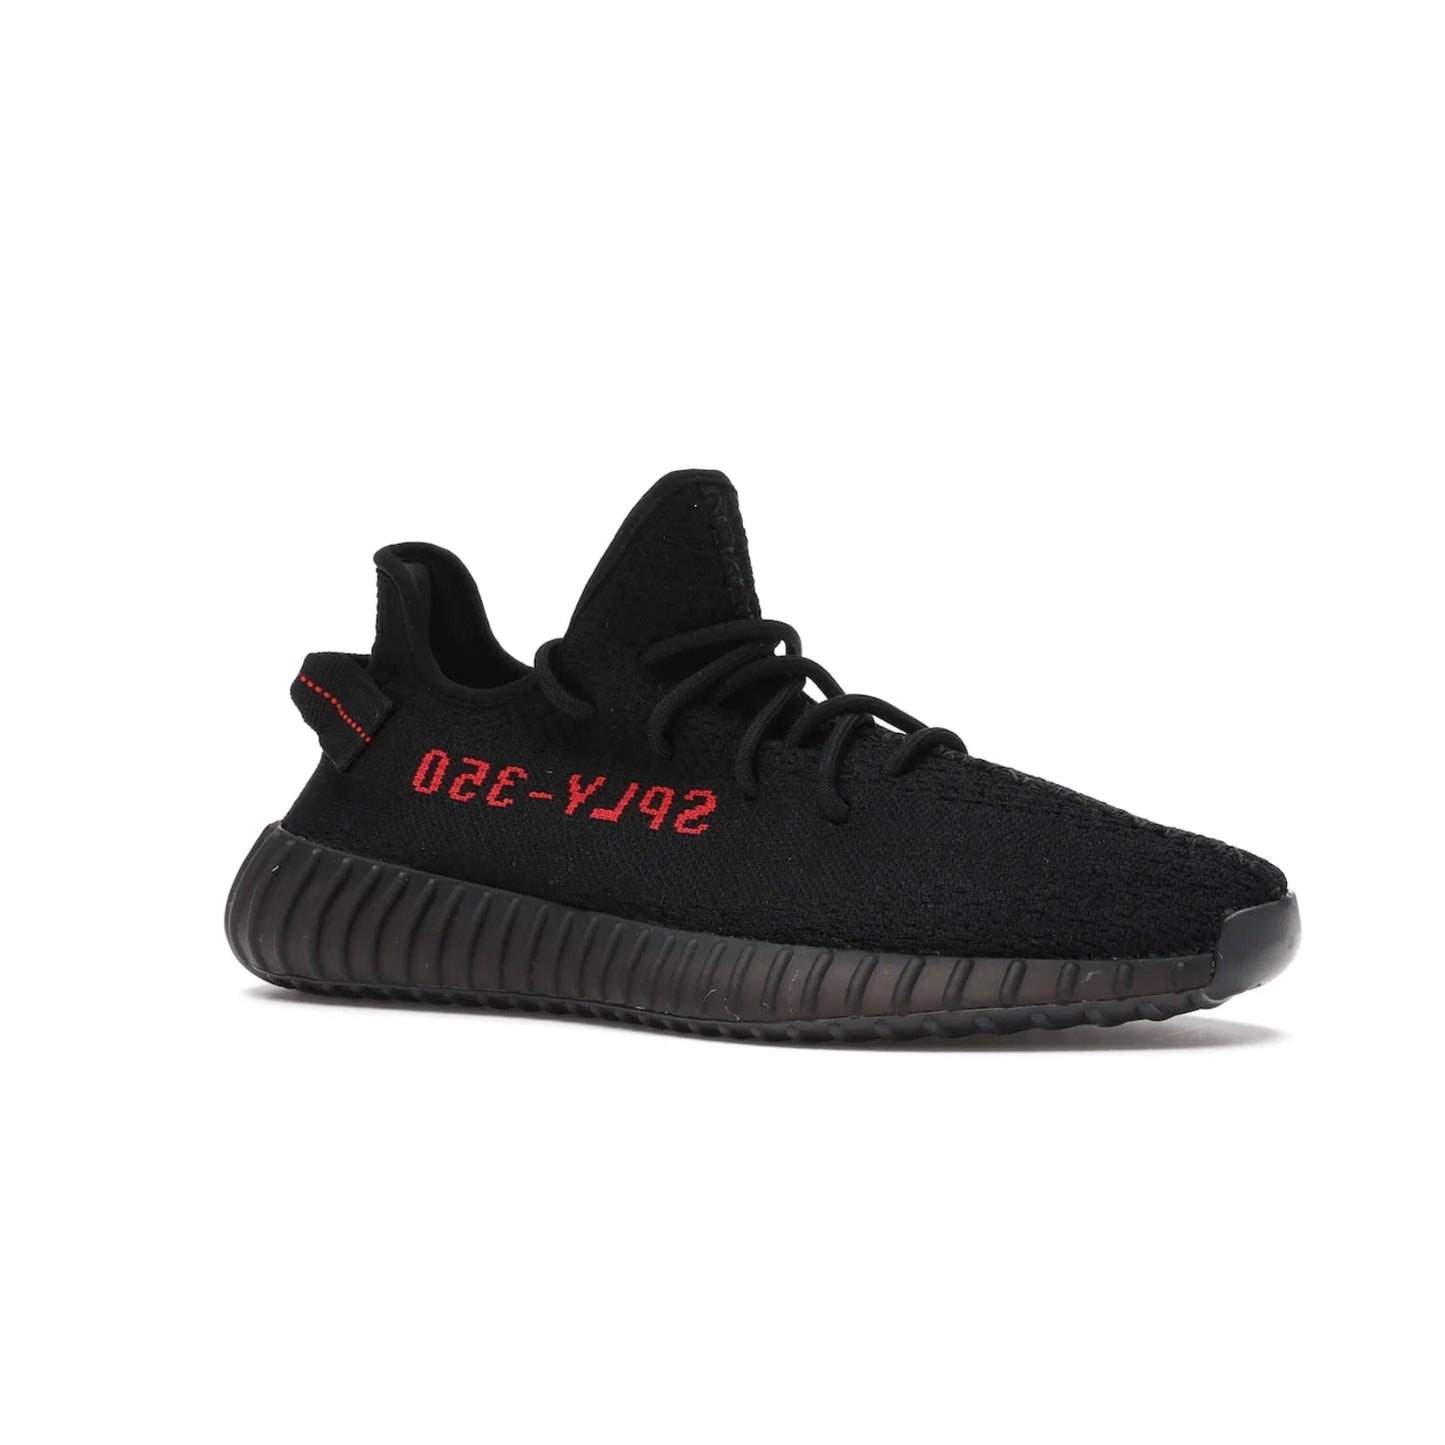 adidas Yeezy Boost 350 V2 Black Red (2017/2020) - Image 4 - Only at www.BallersClubKickz.com - Adidas Yeezy Boost 350 V2 Black Red: a classic colorway featuring black Primeknit upper, BOOST cushioning system, and iconic "SPLY-350" text. Released in 2017 for a retail price of $220.